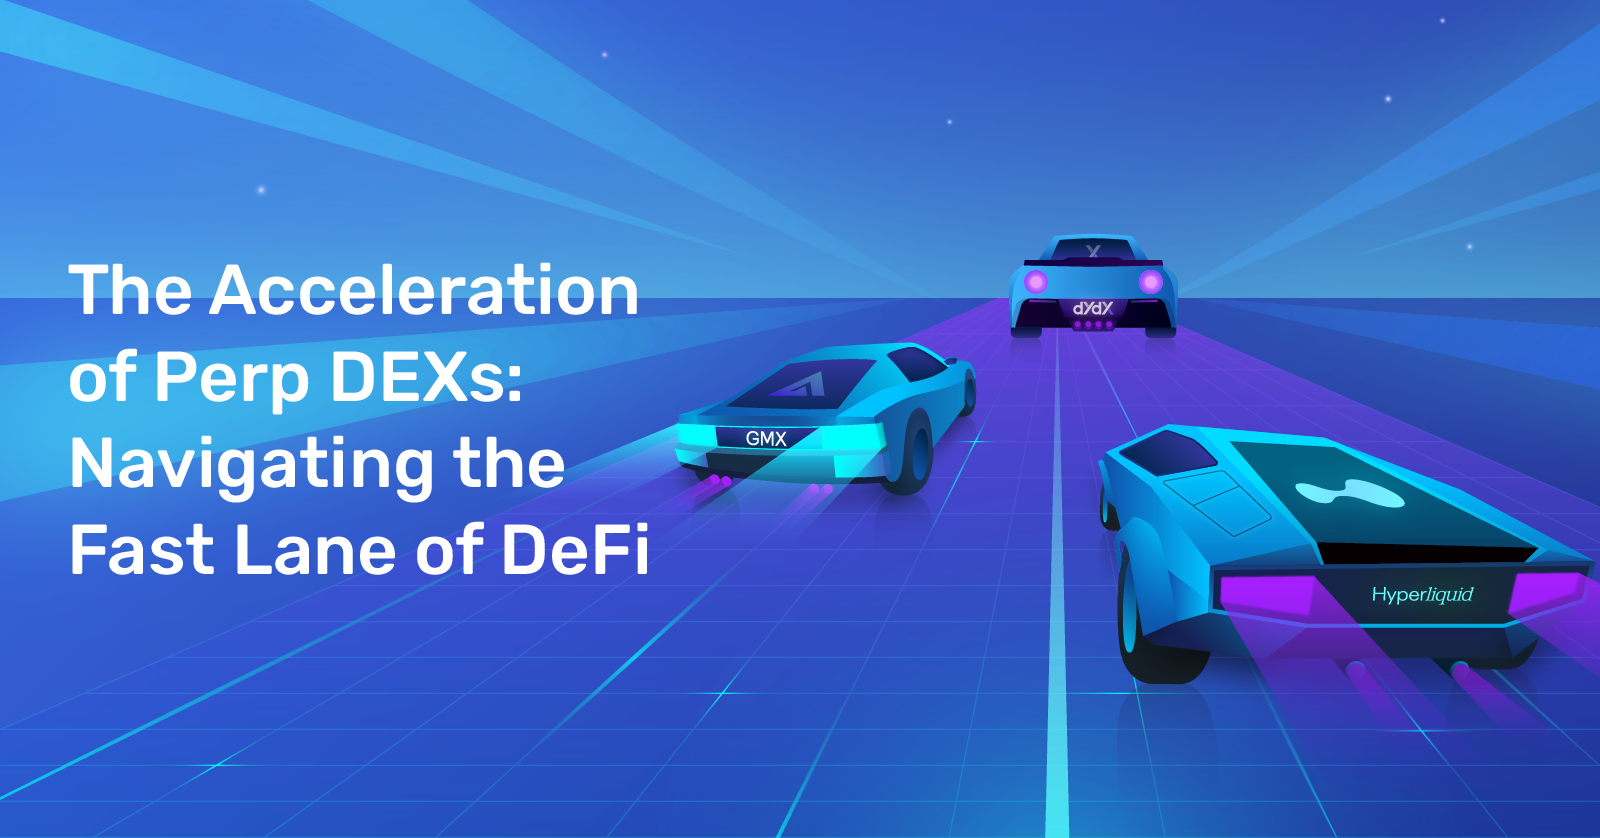 The Acceleration of Perp DEXs: Navigating the Fast Lane of DeFi